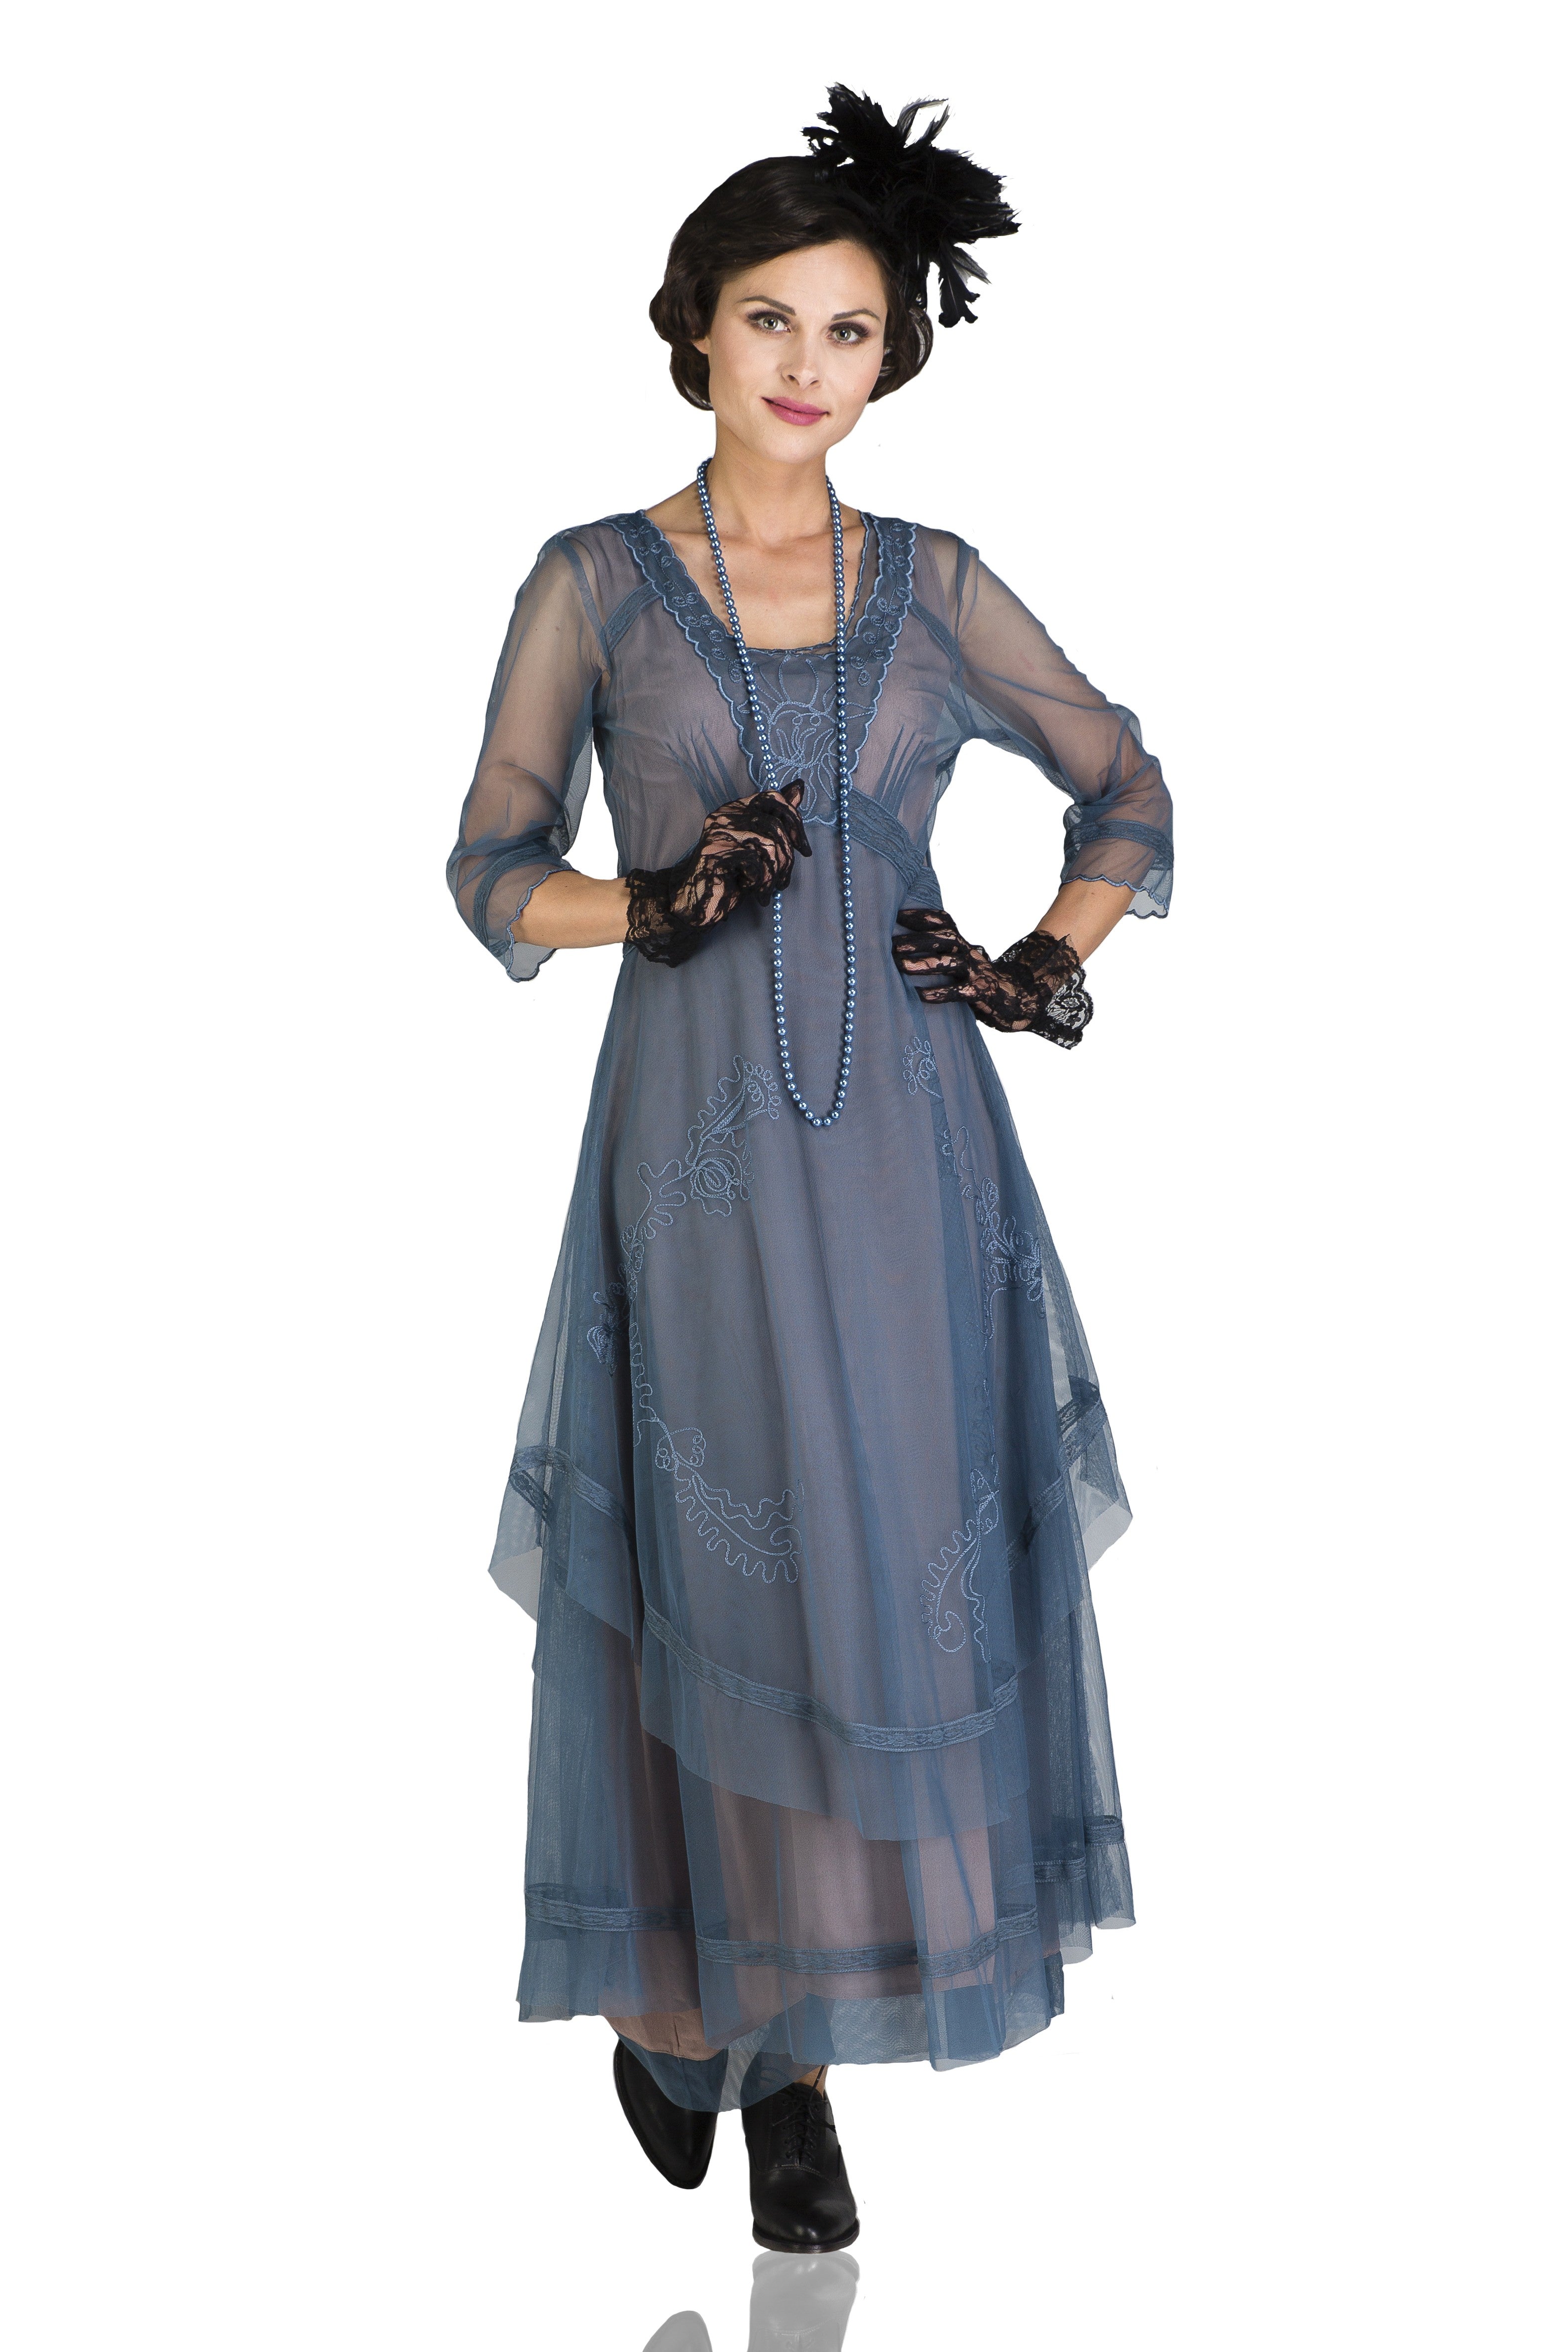 Old Fashioned Dresses | Old Dress Styles Mary Darling Dress in Azure by Nataya $265.00 AT vintagedancer.com